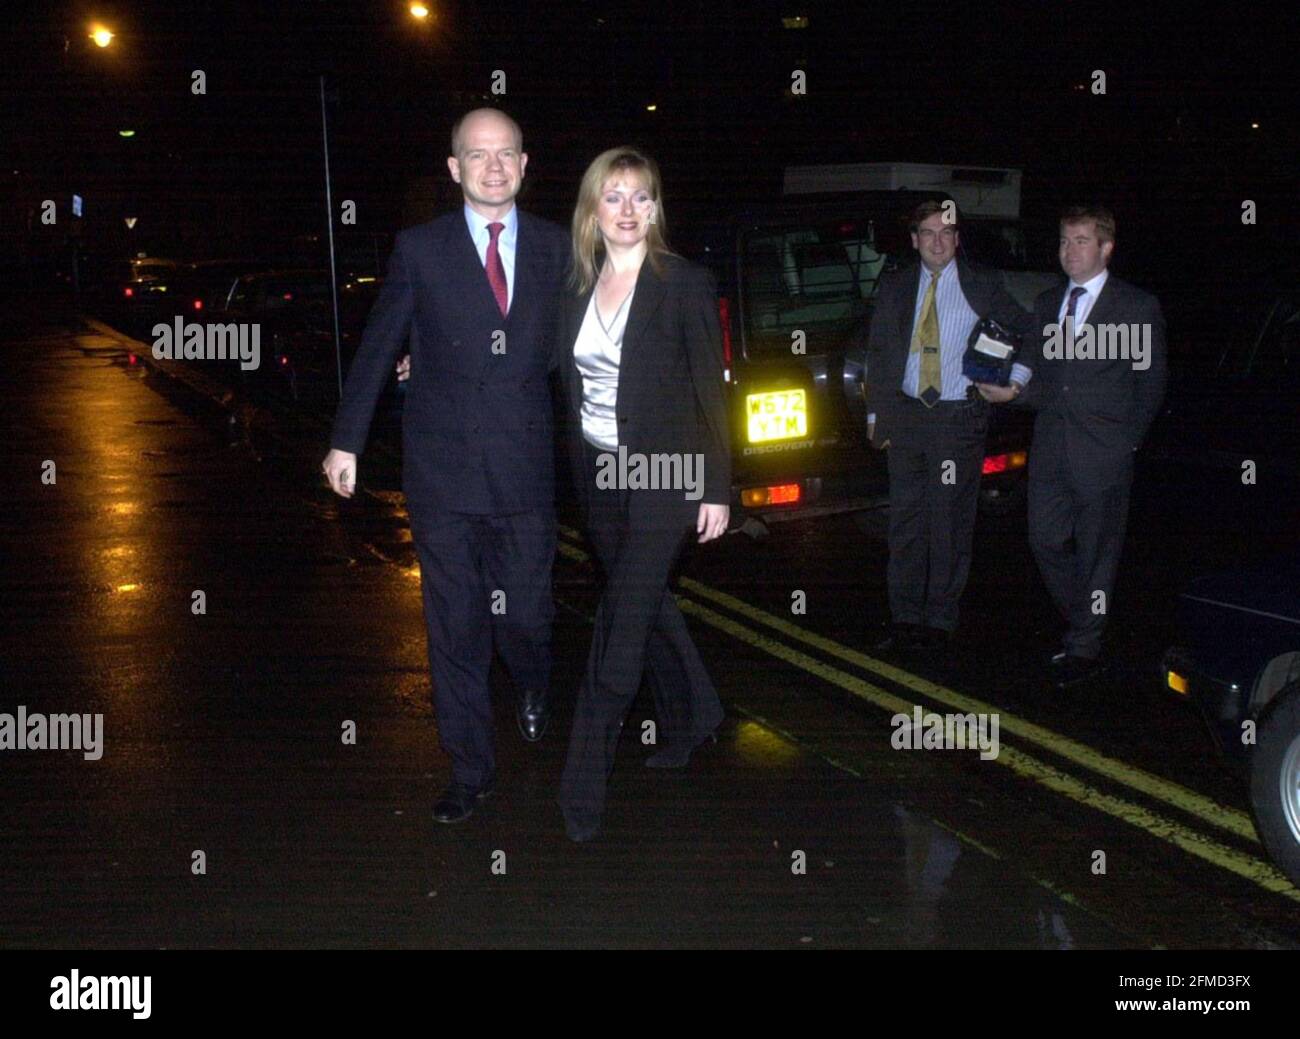 Baroness Thatcher Christmas party at her London office. William Hague and Ffion arriving. 11.12.00    Pic: JOHN VOOS Stock Photo